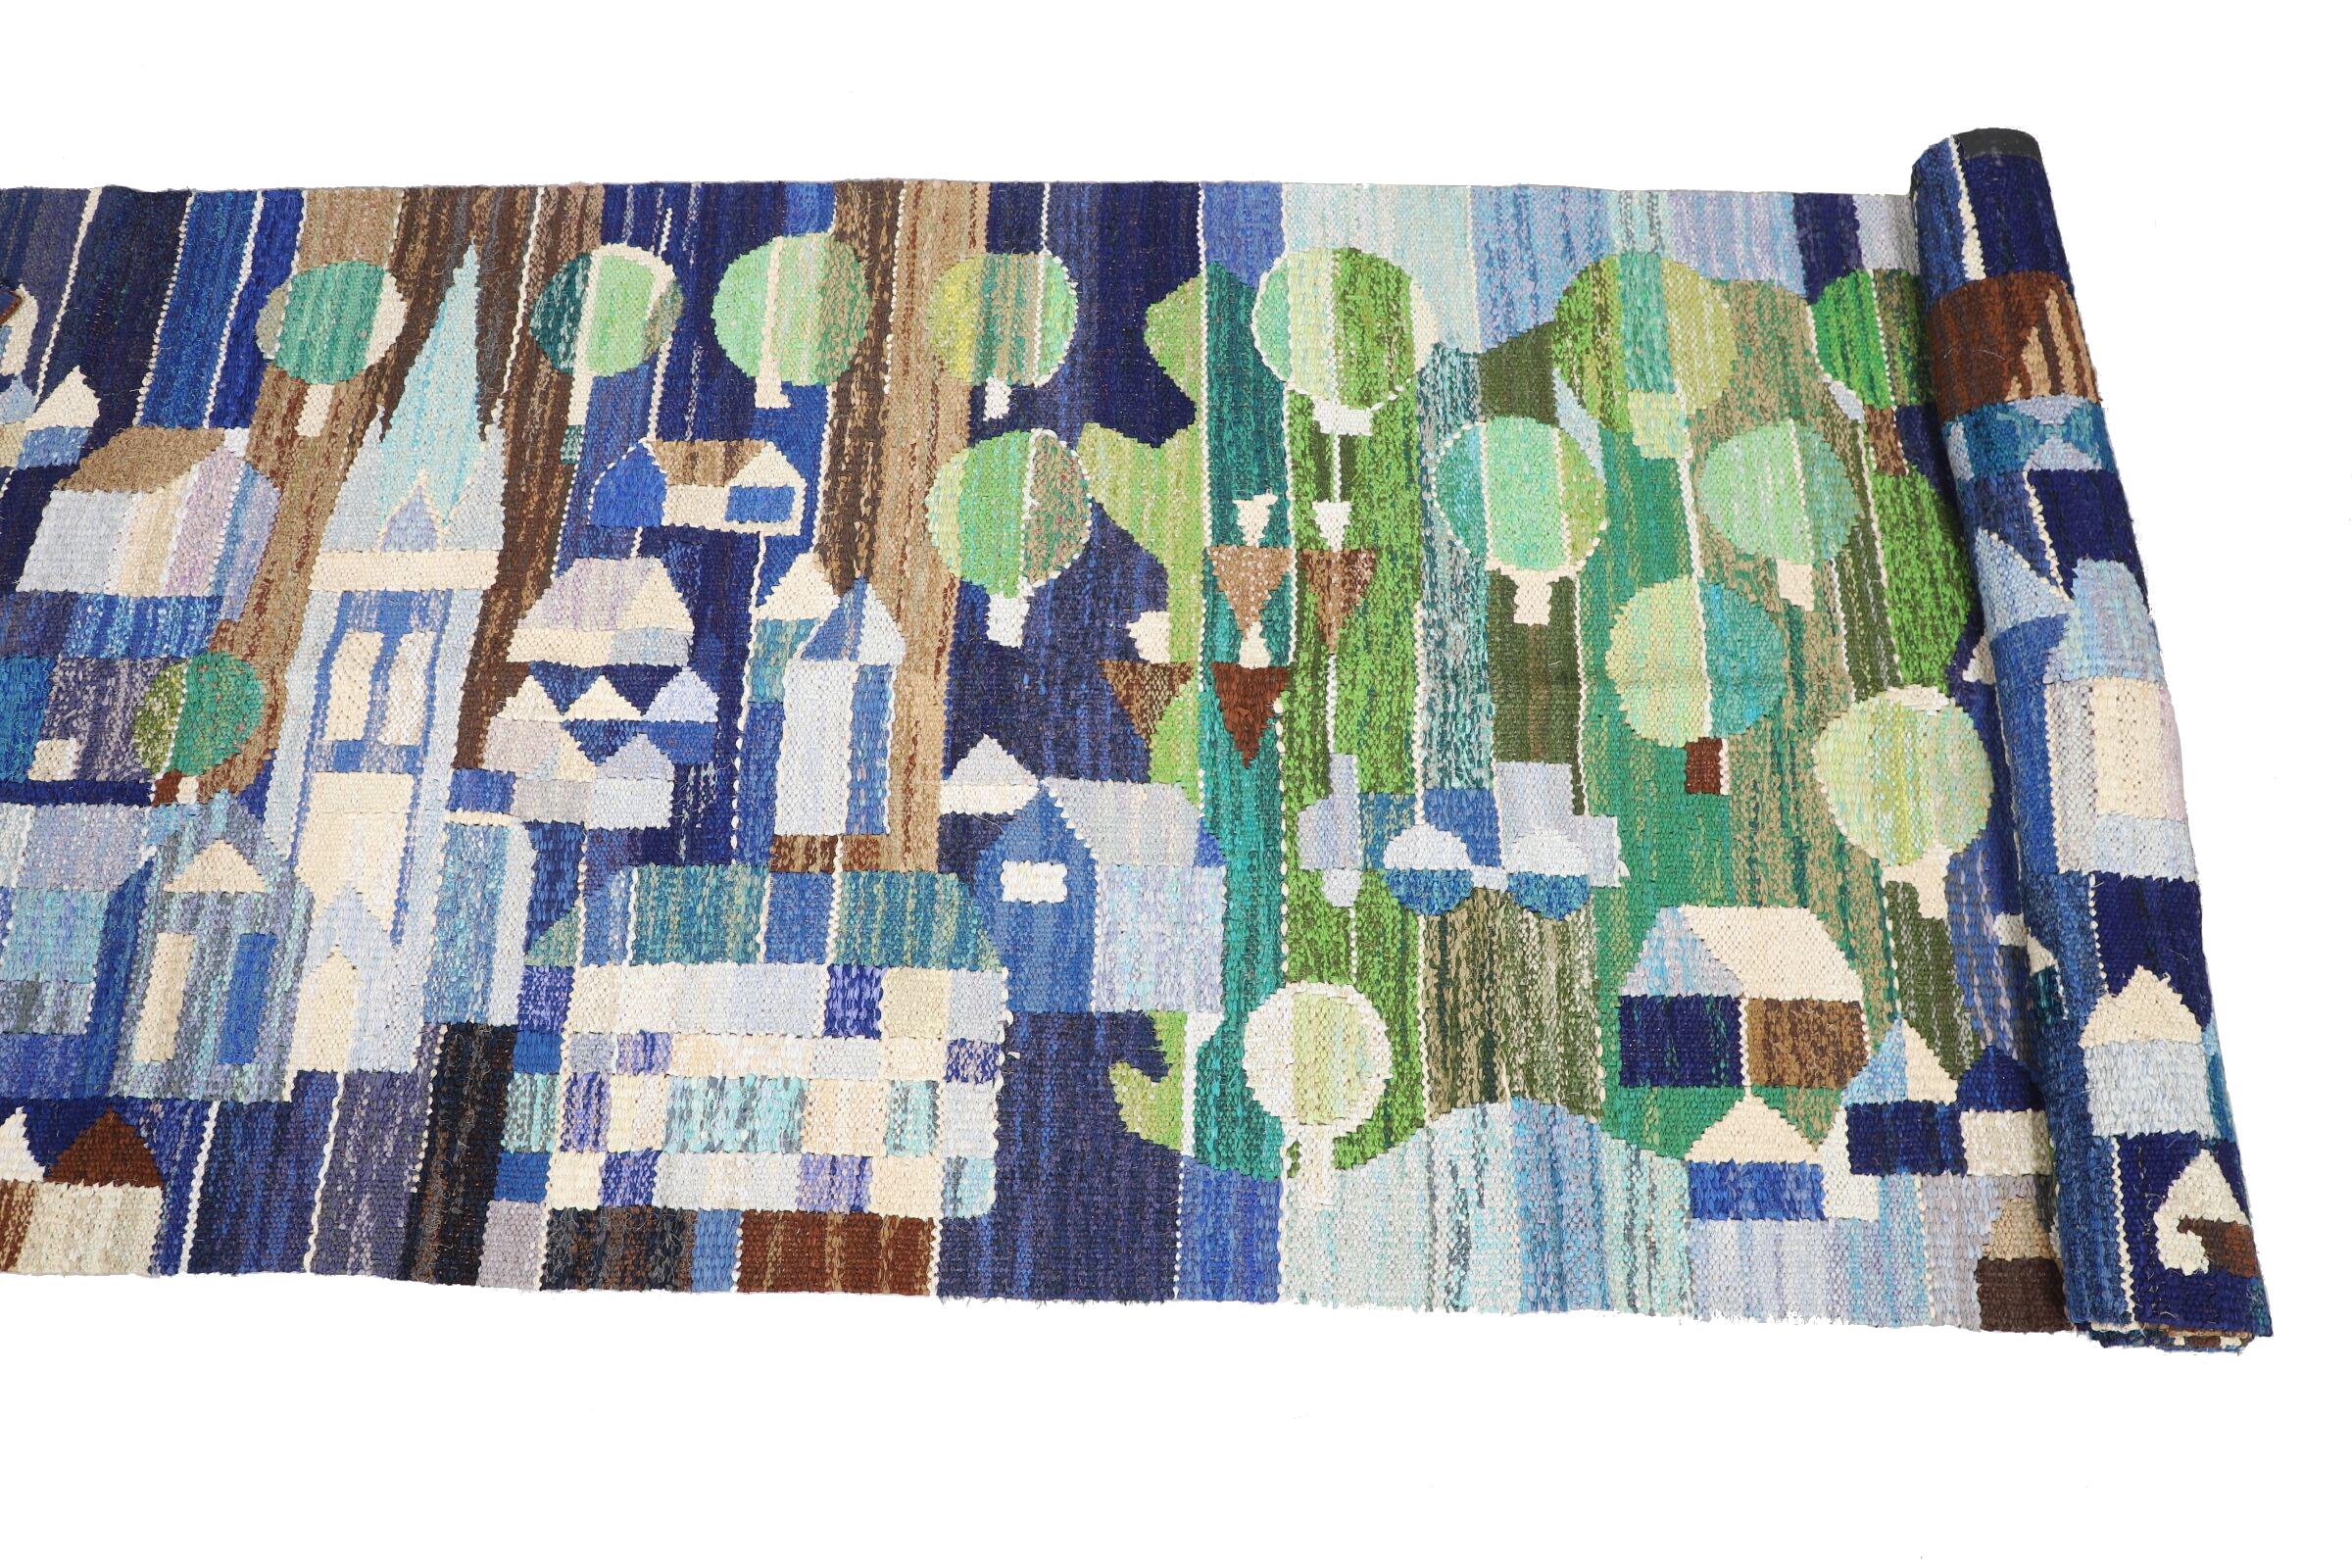 Very Long Swedish Rug Depicting a Village in Shades of Blue, Green, and Brown In Good Condition For Sale In Stockholm, SE